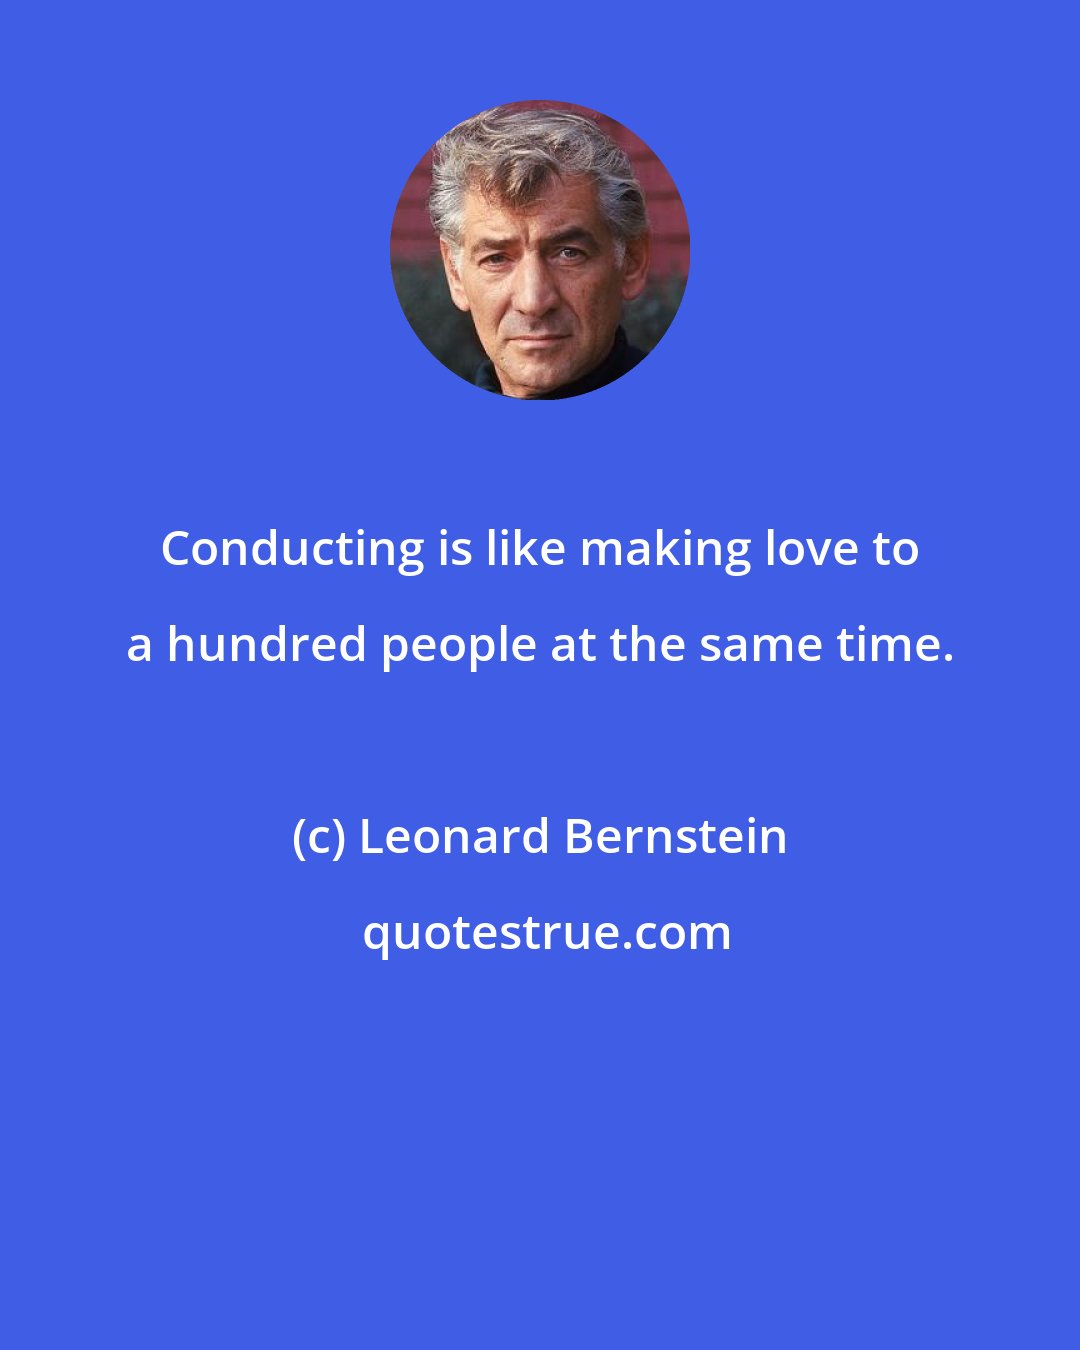 Leonard Bernstein: Conducting is like making love to a hundred people at the same time.